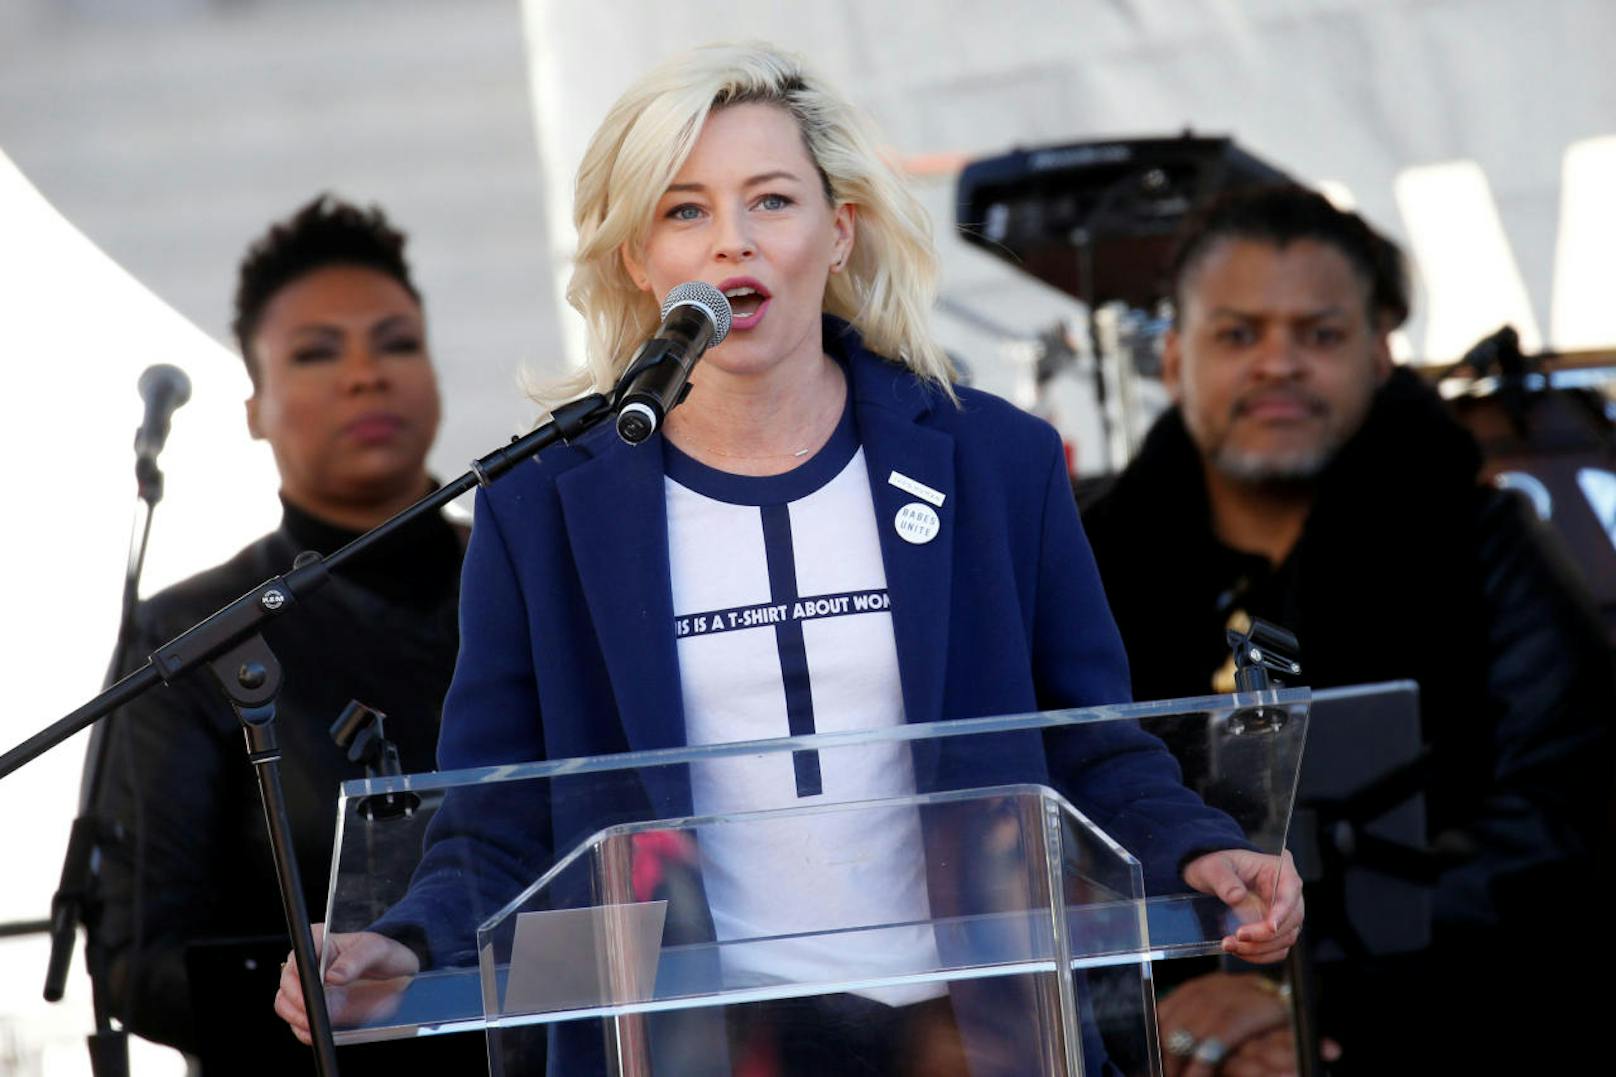 Elizabeth Banks (Pitch Perfect) beim Women's March 2018 in Los Angeles